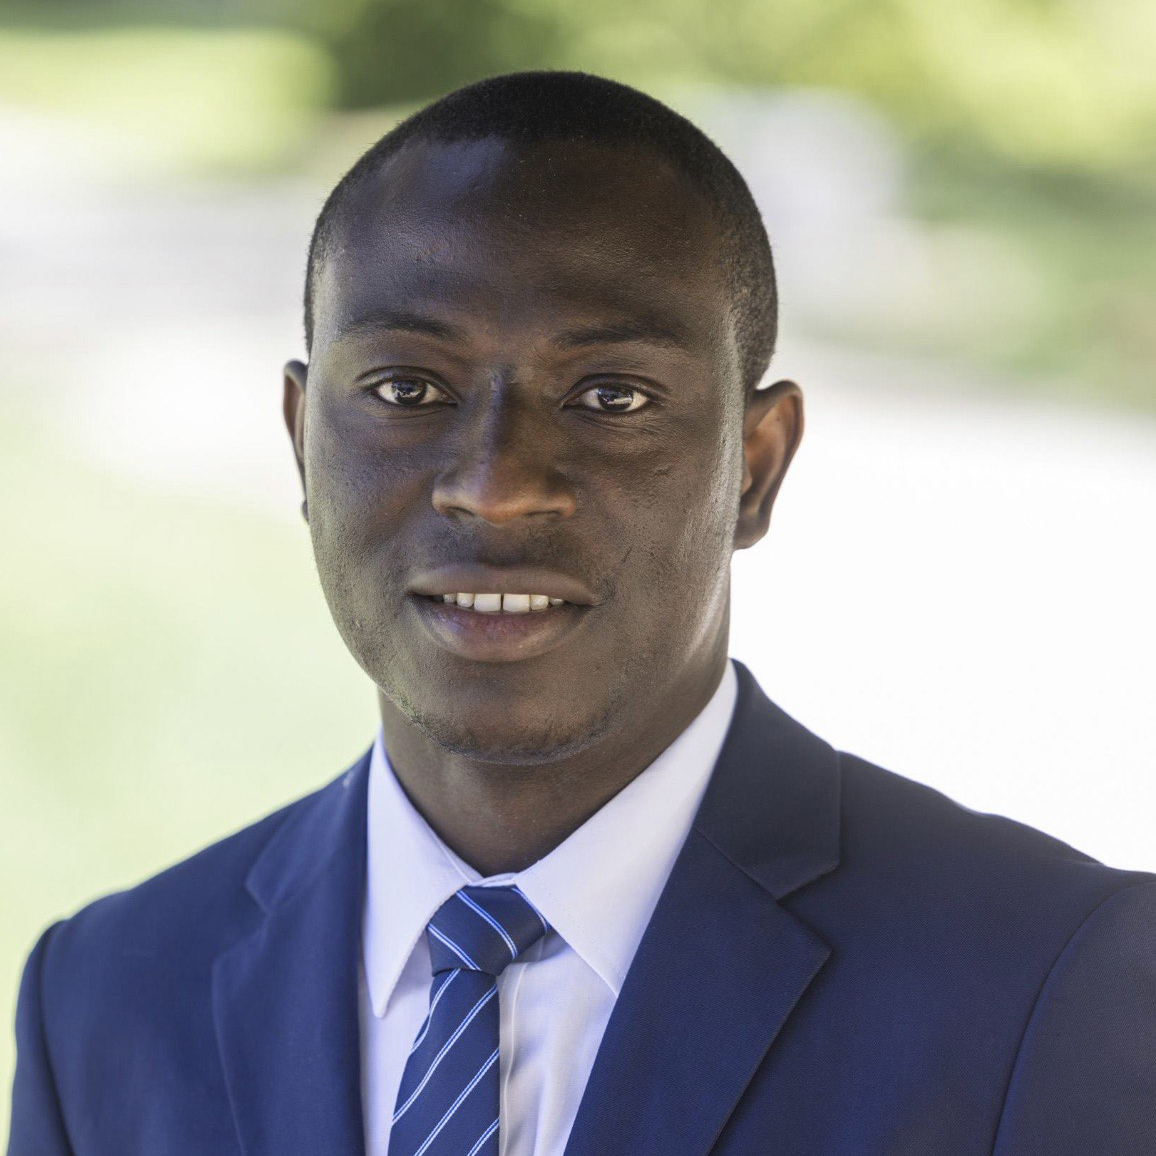 @EmoryEconomics is proud to announce the following Ph.D. students on the #EconJobMarket in 2023-24. We're delighted to introduce @DrewSmithEcon and @WTakumah 👇👇 economics.emory.edu/graduate/phd-j… @laneygradschool #EconTwitter